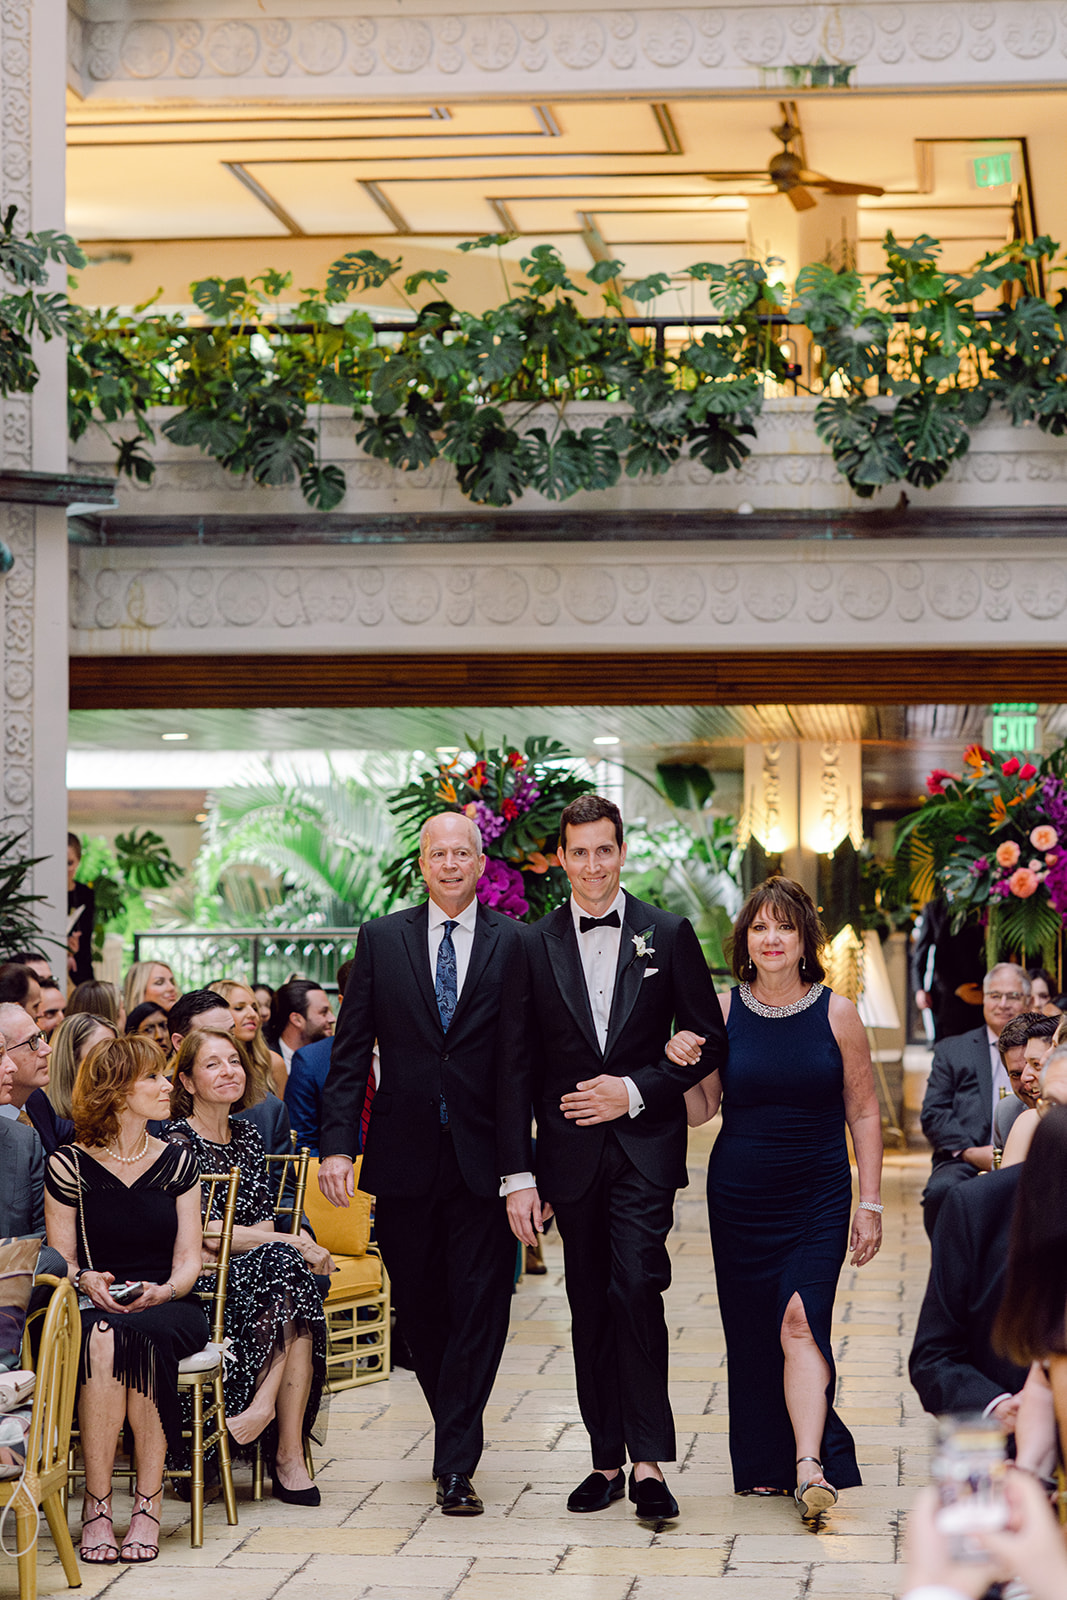 Groom walks down aisle with parents during ceremony at Mayfair House Hotel & Garden in Miami on wedding day.